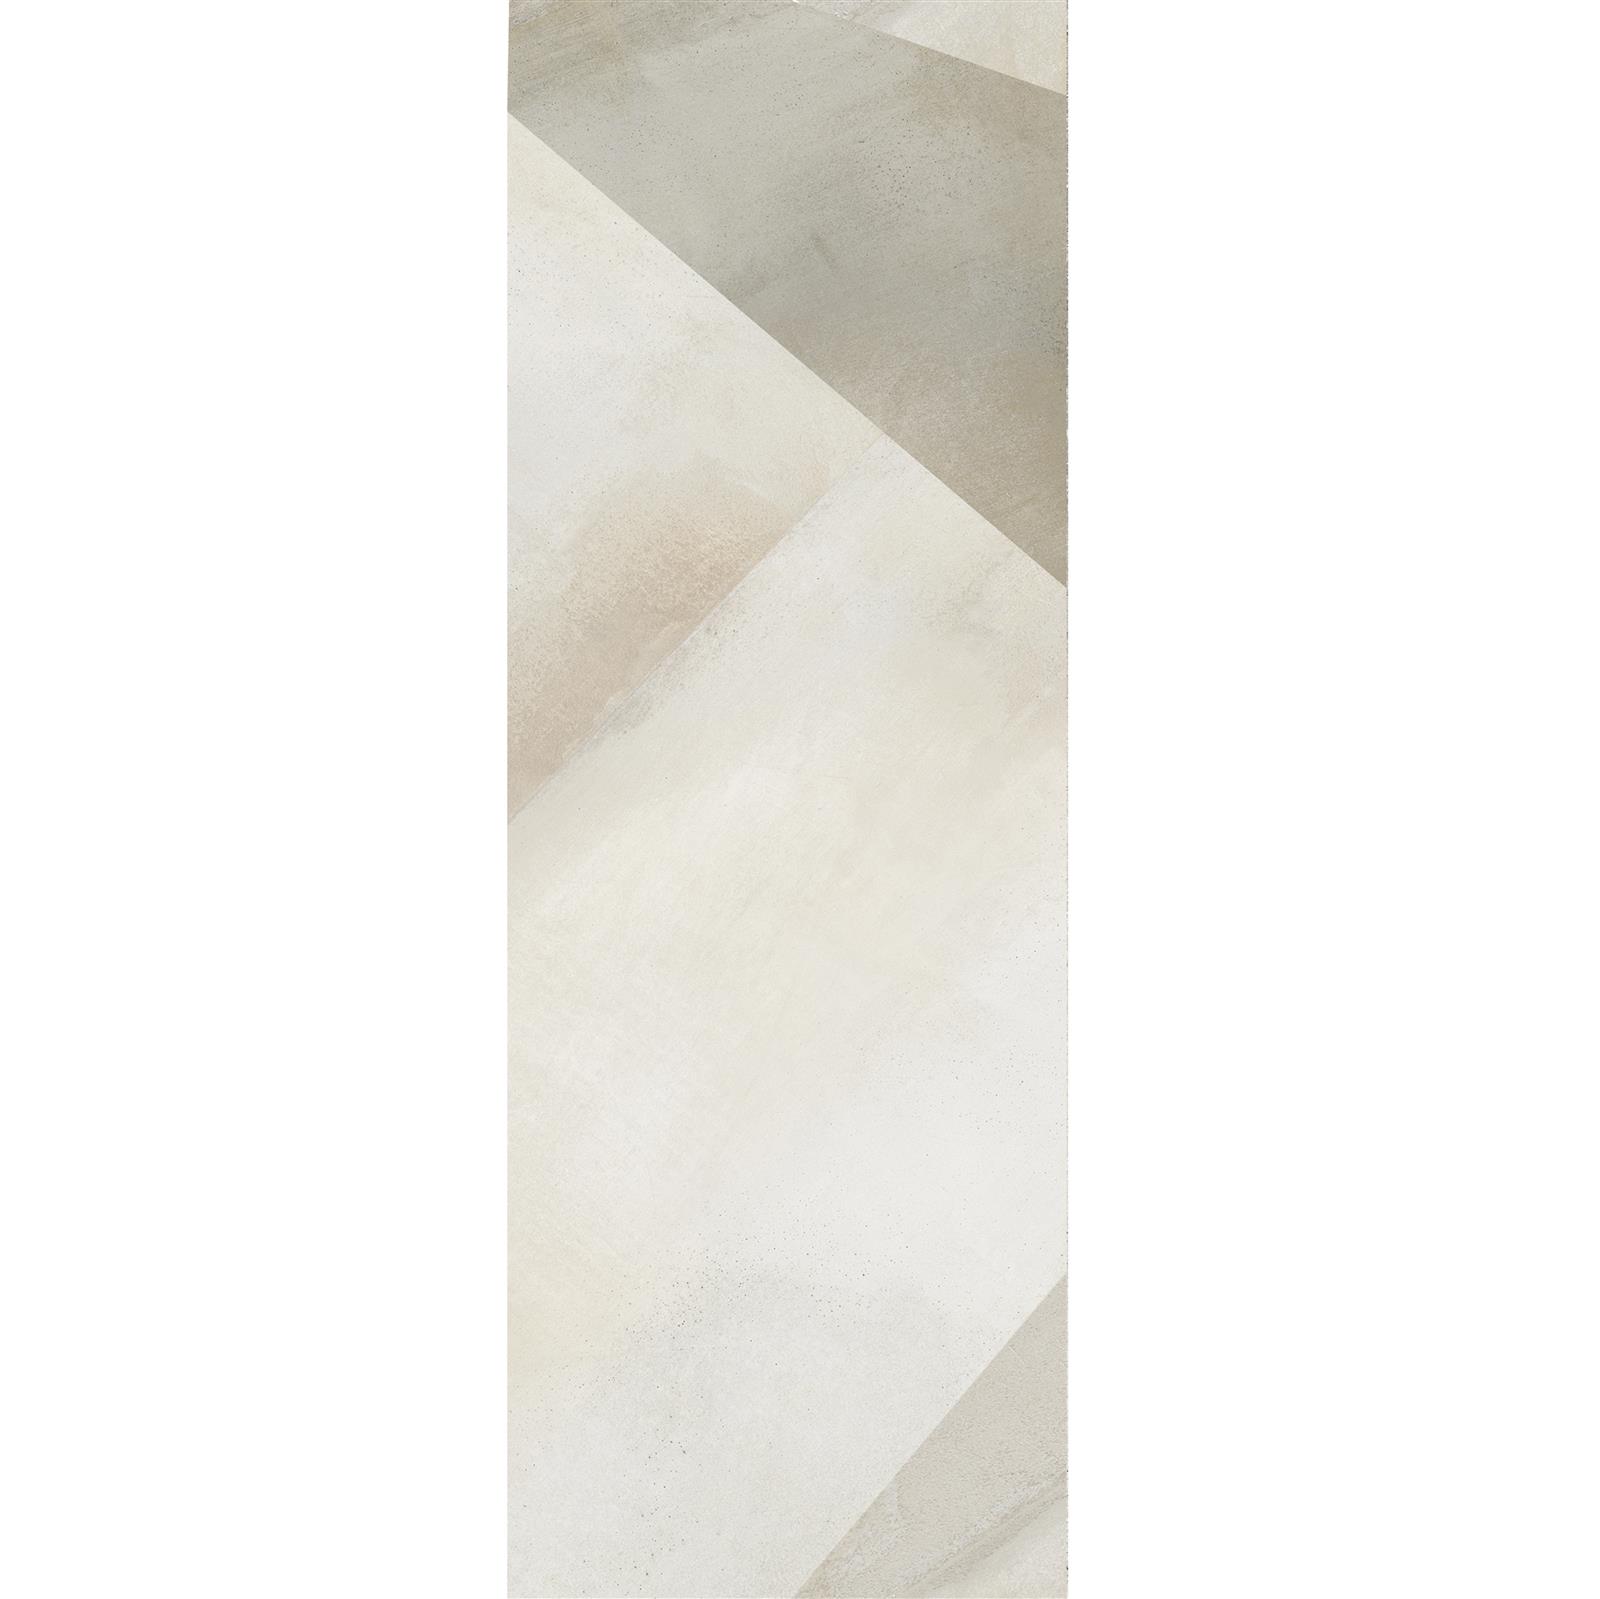 Wall Tiles Queens Rectified Sand Decor 1 30x90cm